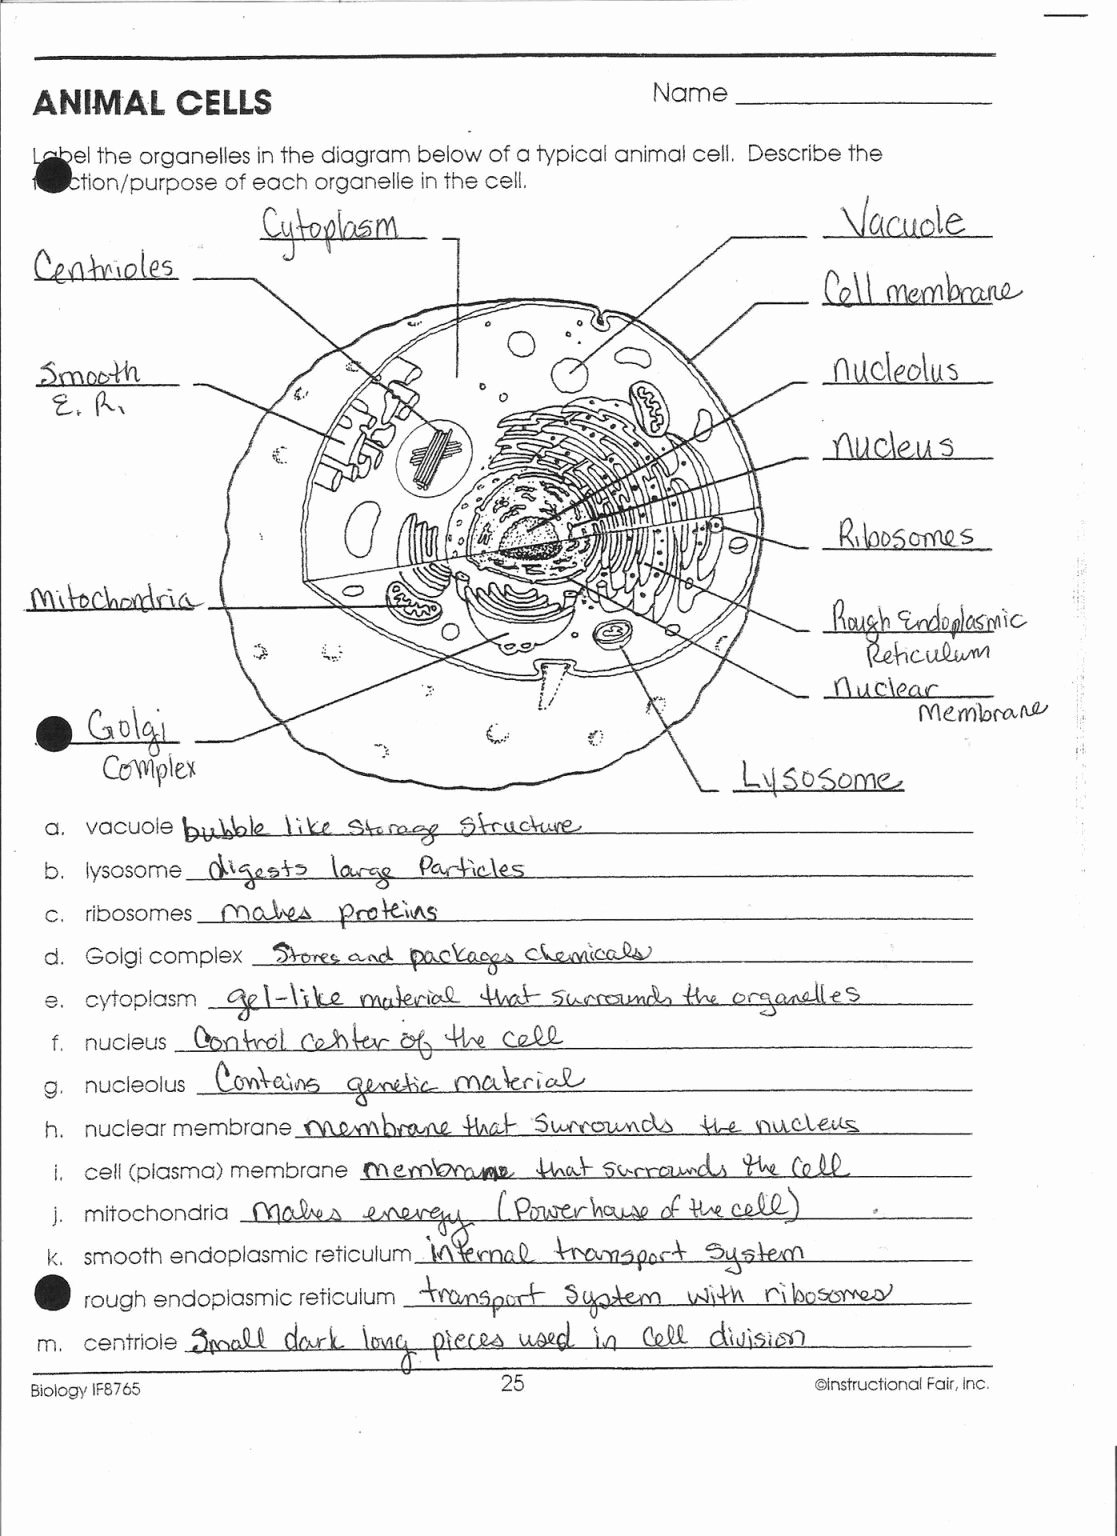 Cell organelles Worksheet Answer Key Awesome Cell organelles Worksheet Answer Key